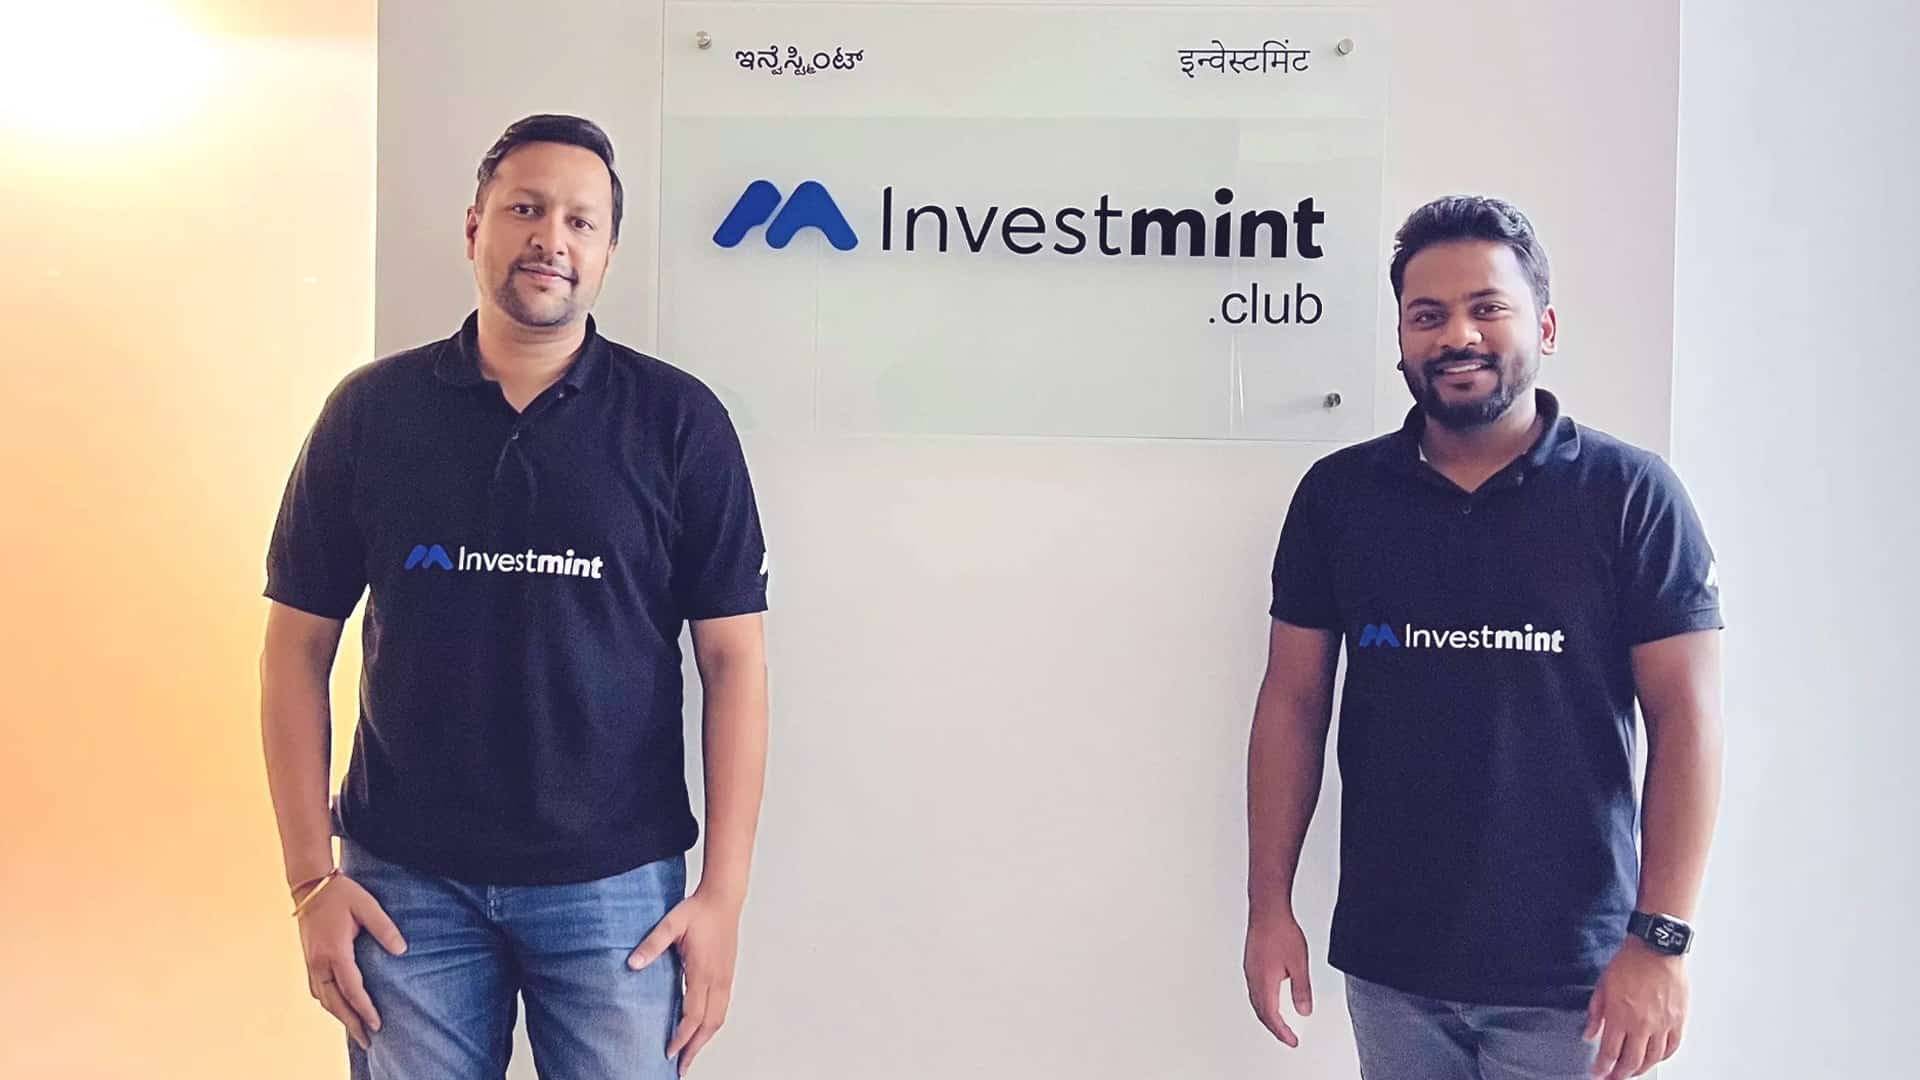 Signal-based trading platform Investmint raises $2 Million in seed funding led by Nexus Venture Partnersq